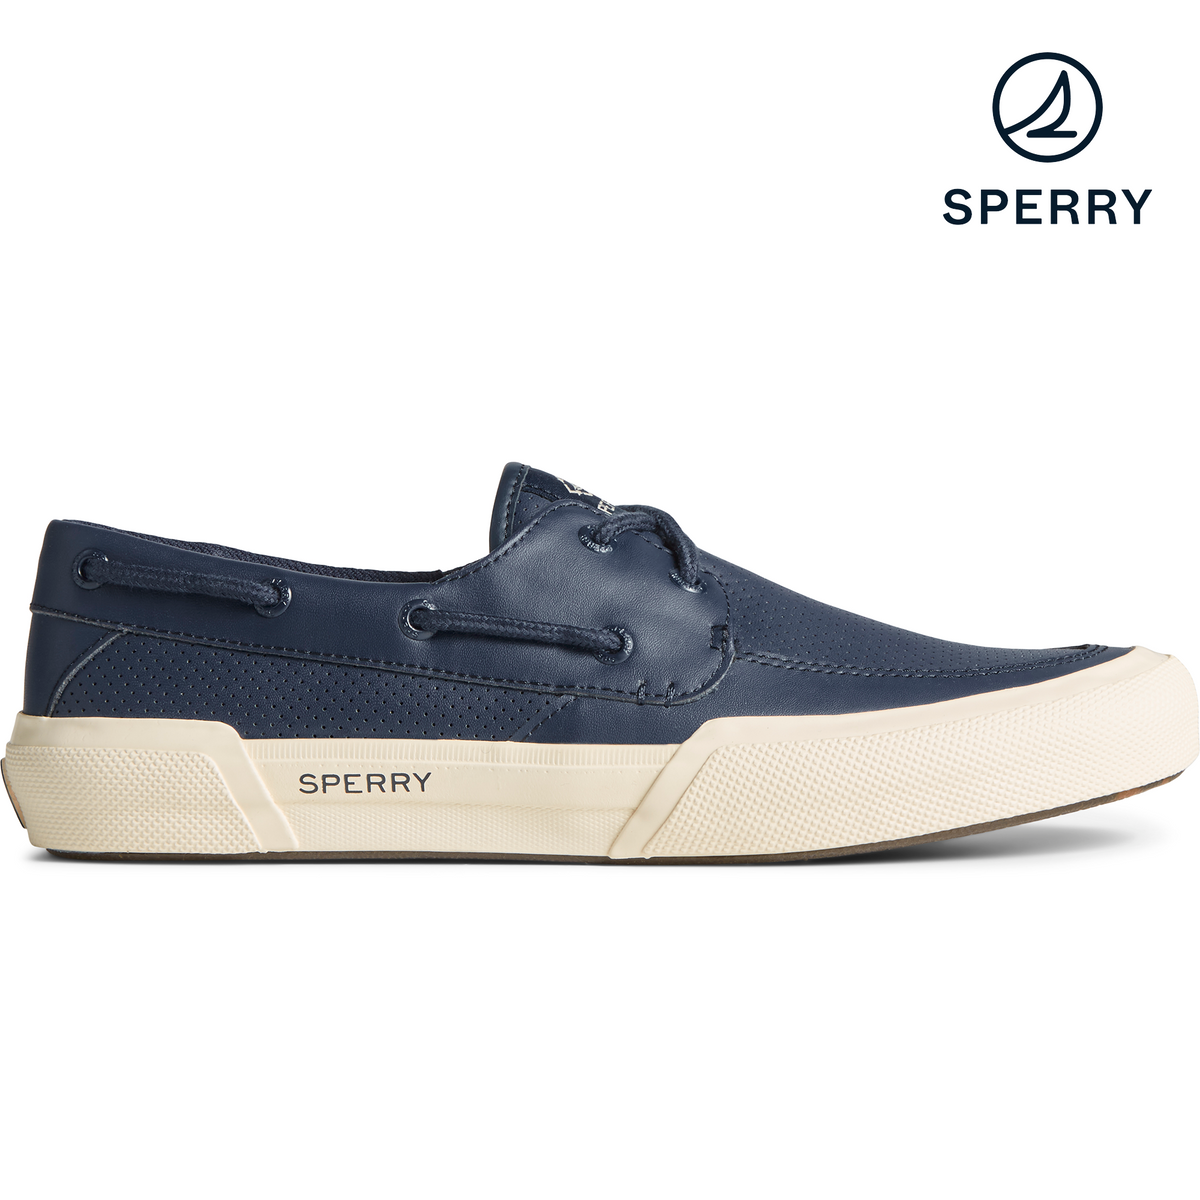 SPERRY SeaCycled Soletide Men's Shoes